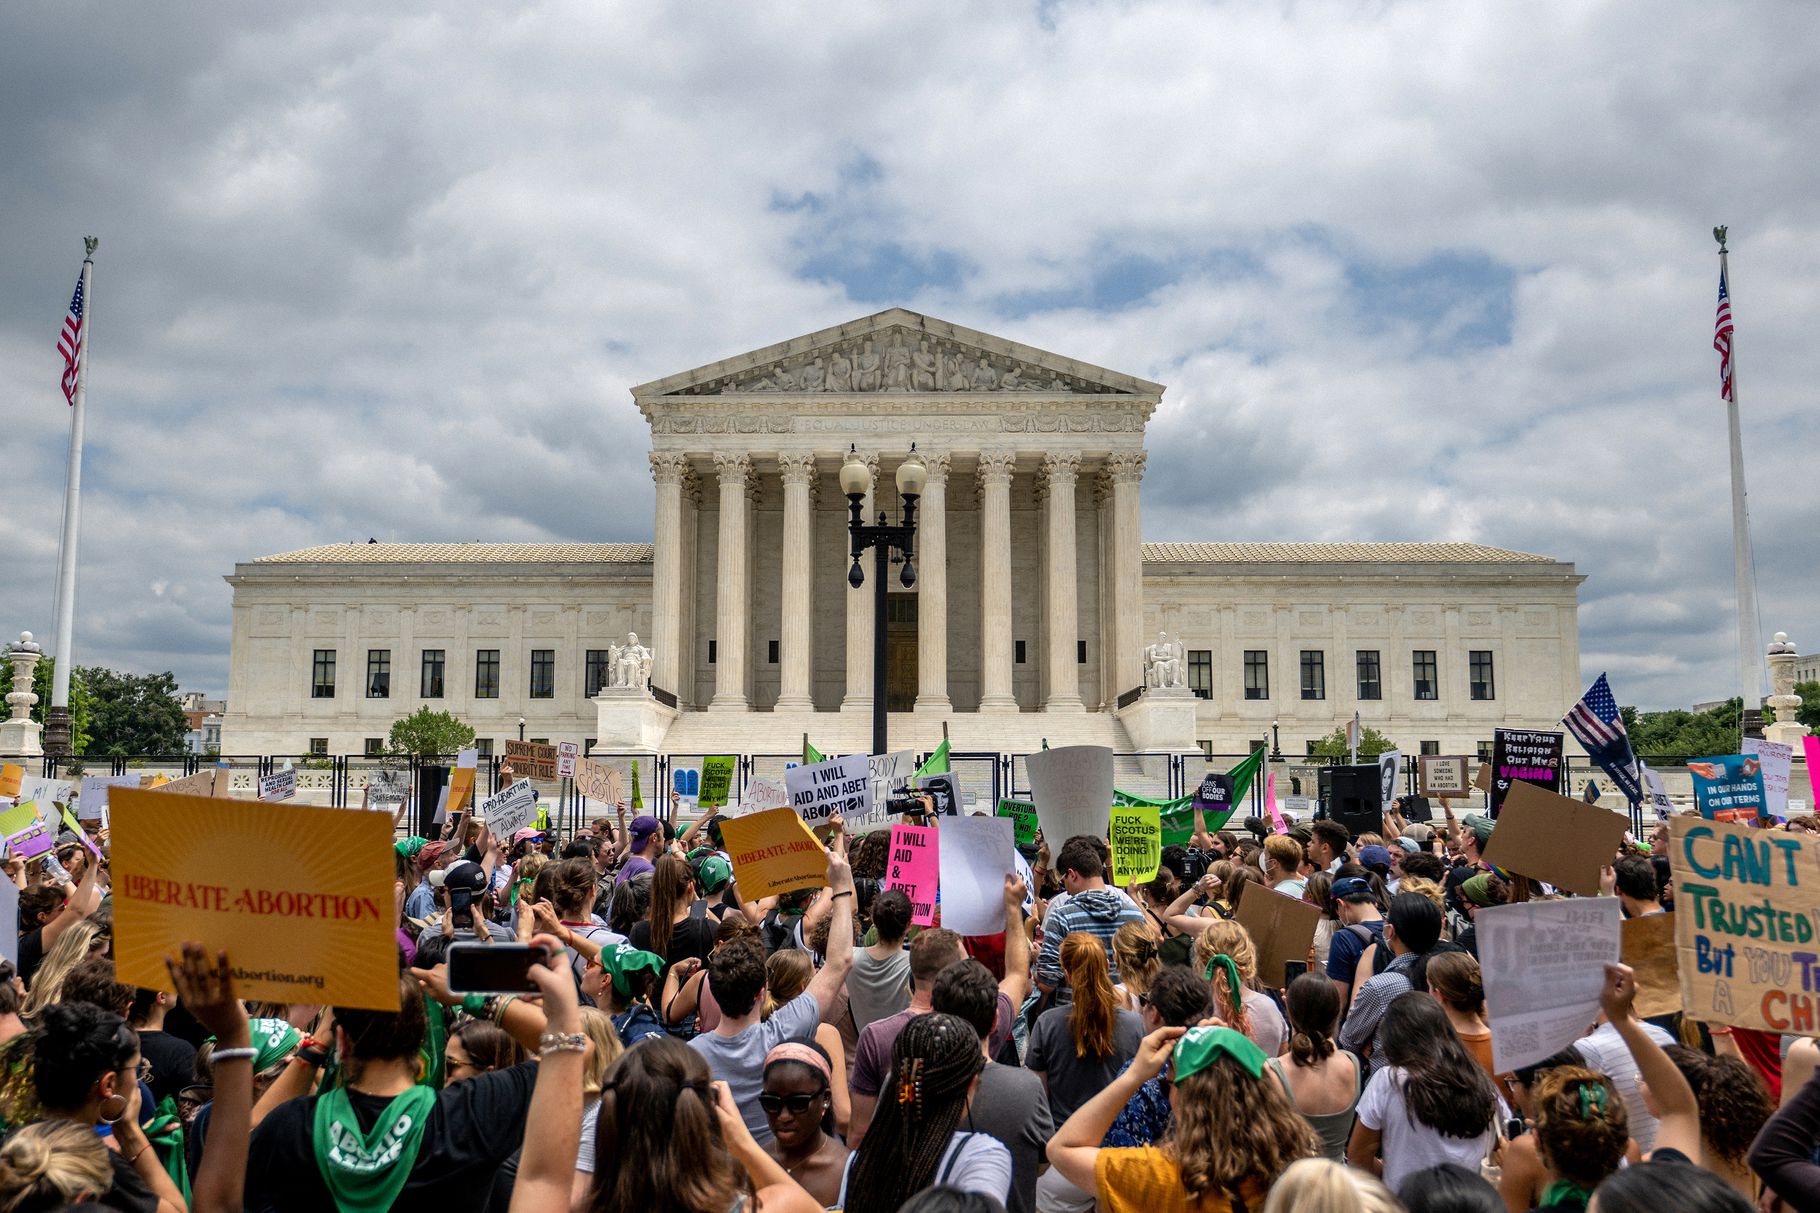 Protesters rally in front of the US Supreme Court on June 24, when the court overruled Roe v. Wade